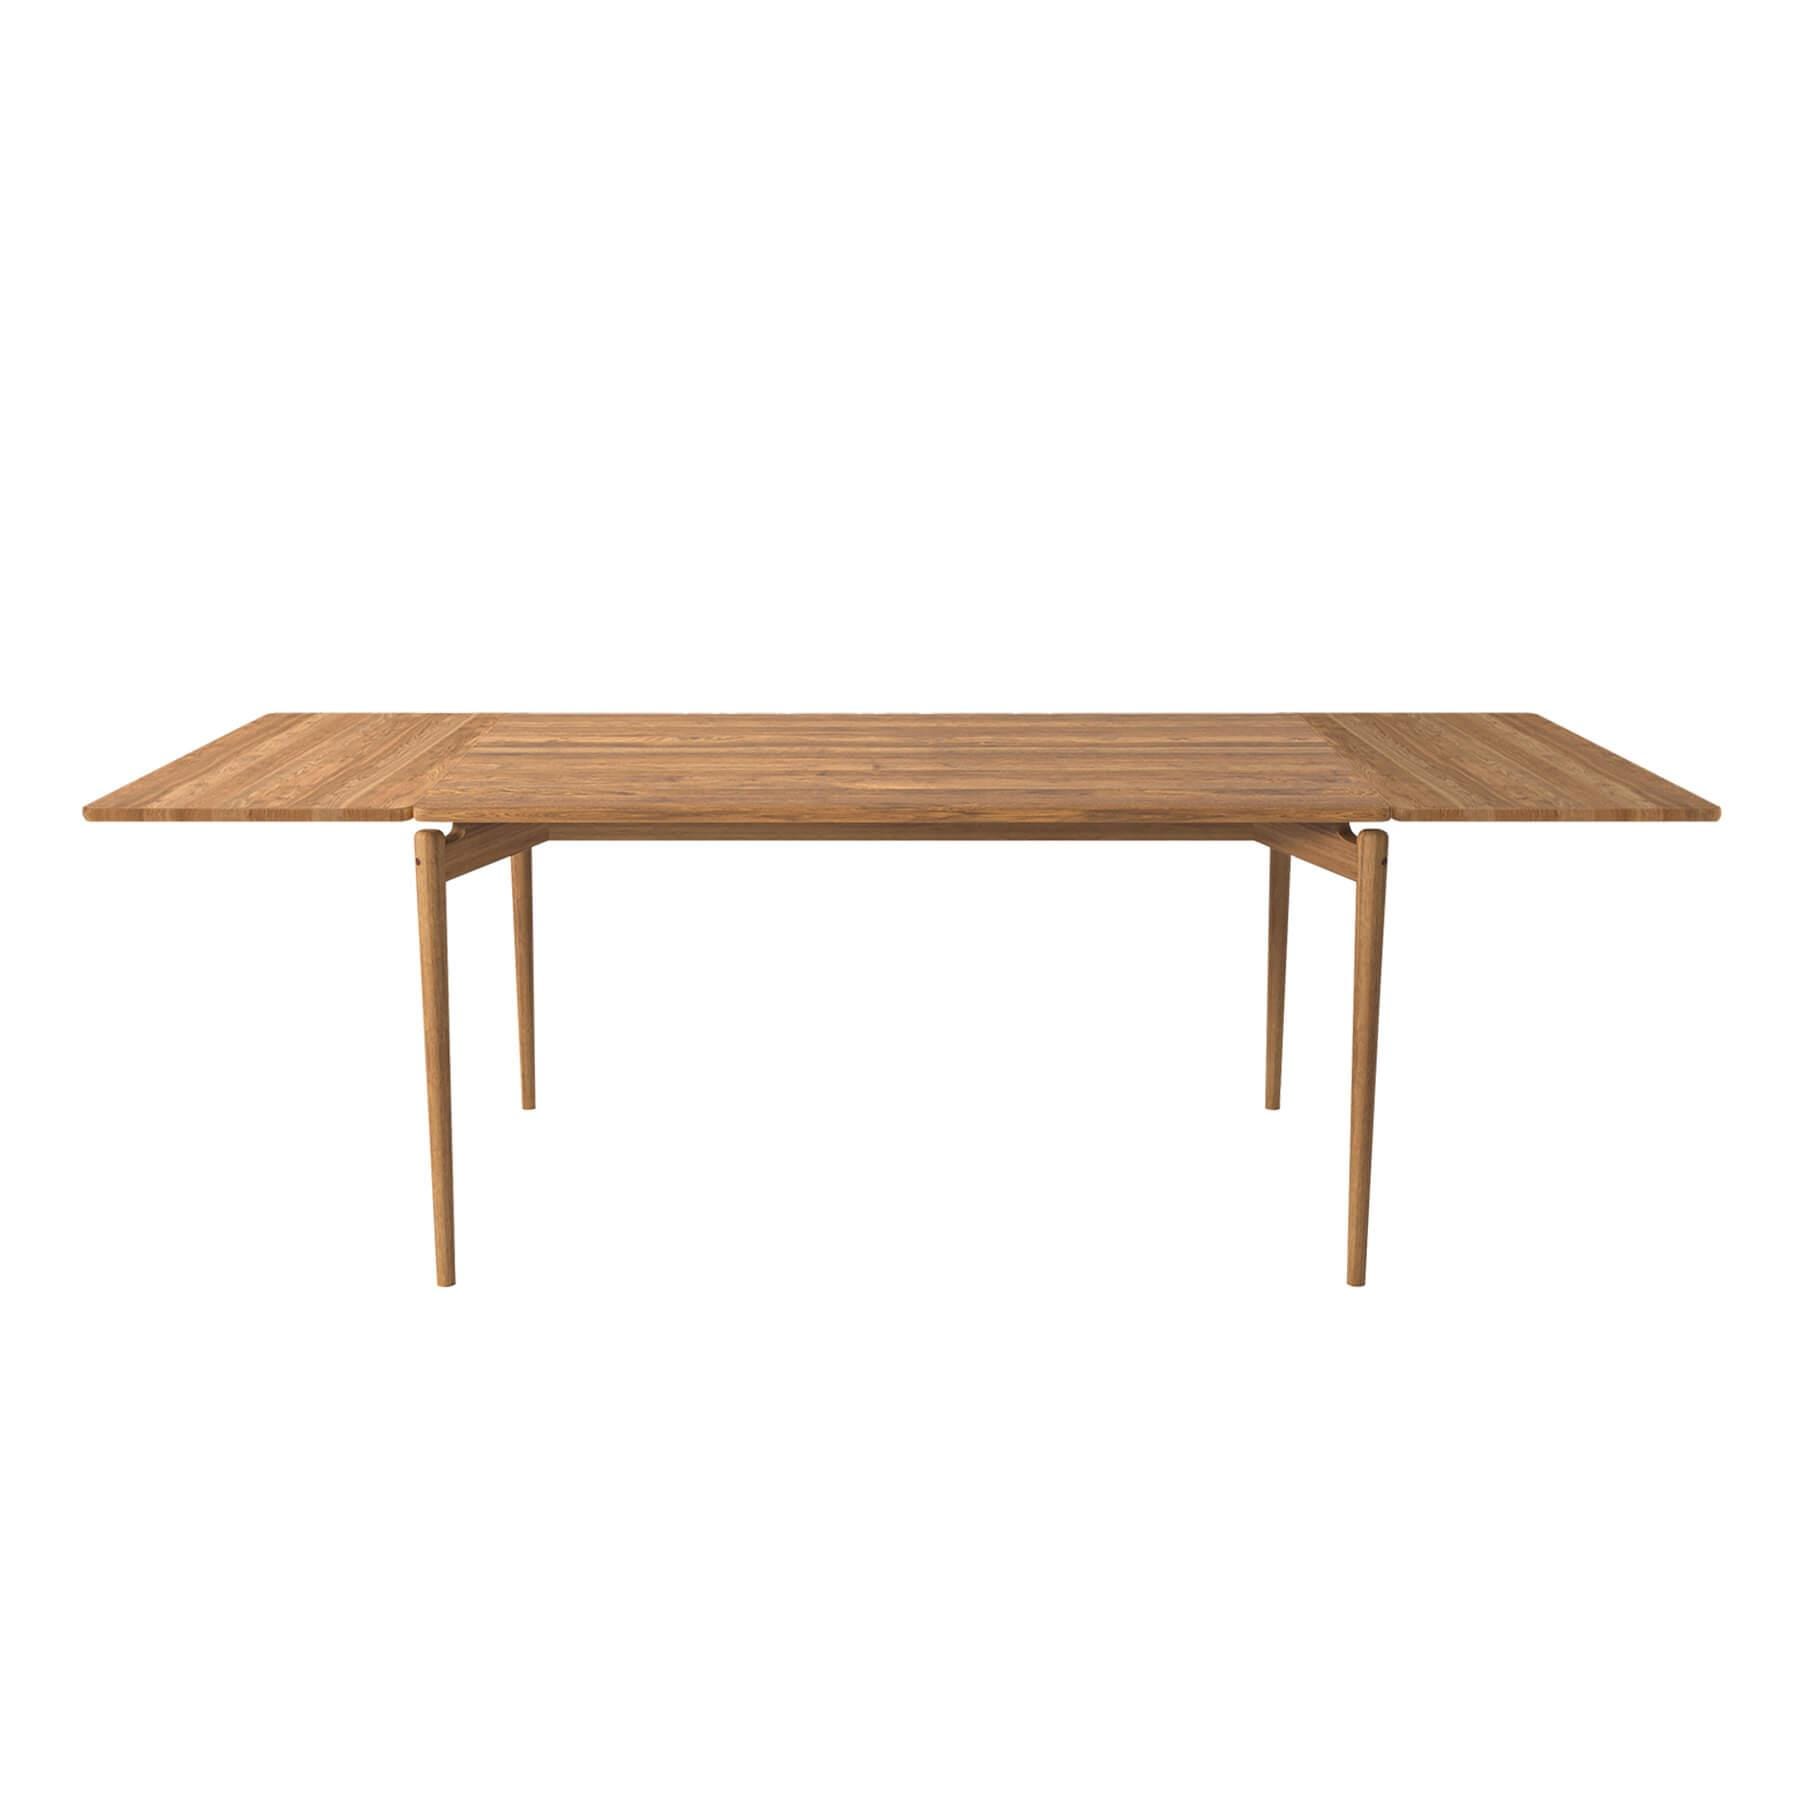 Bruunmunch Pure Dining Table 140cm Oak Natural Oil 2 Matching Plates Light Wood Designer Furniture From Holloways Of Ludlow